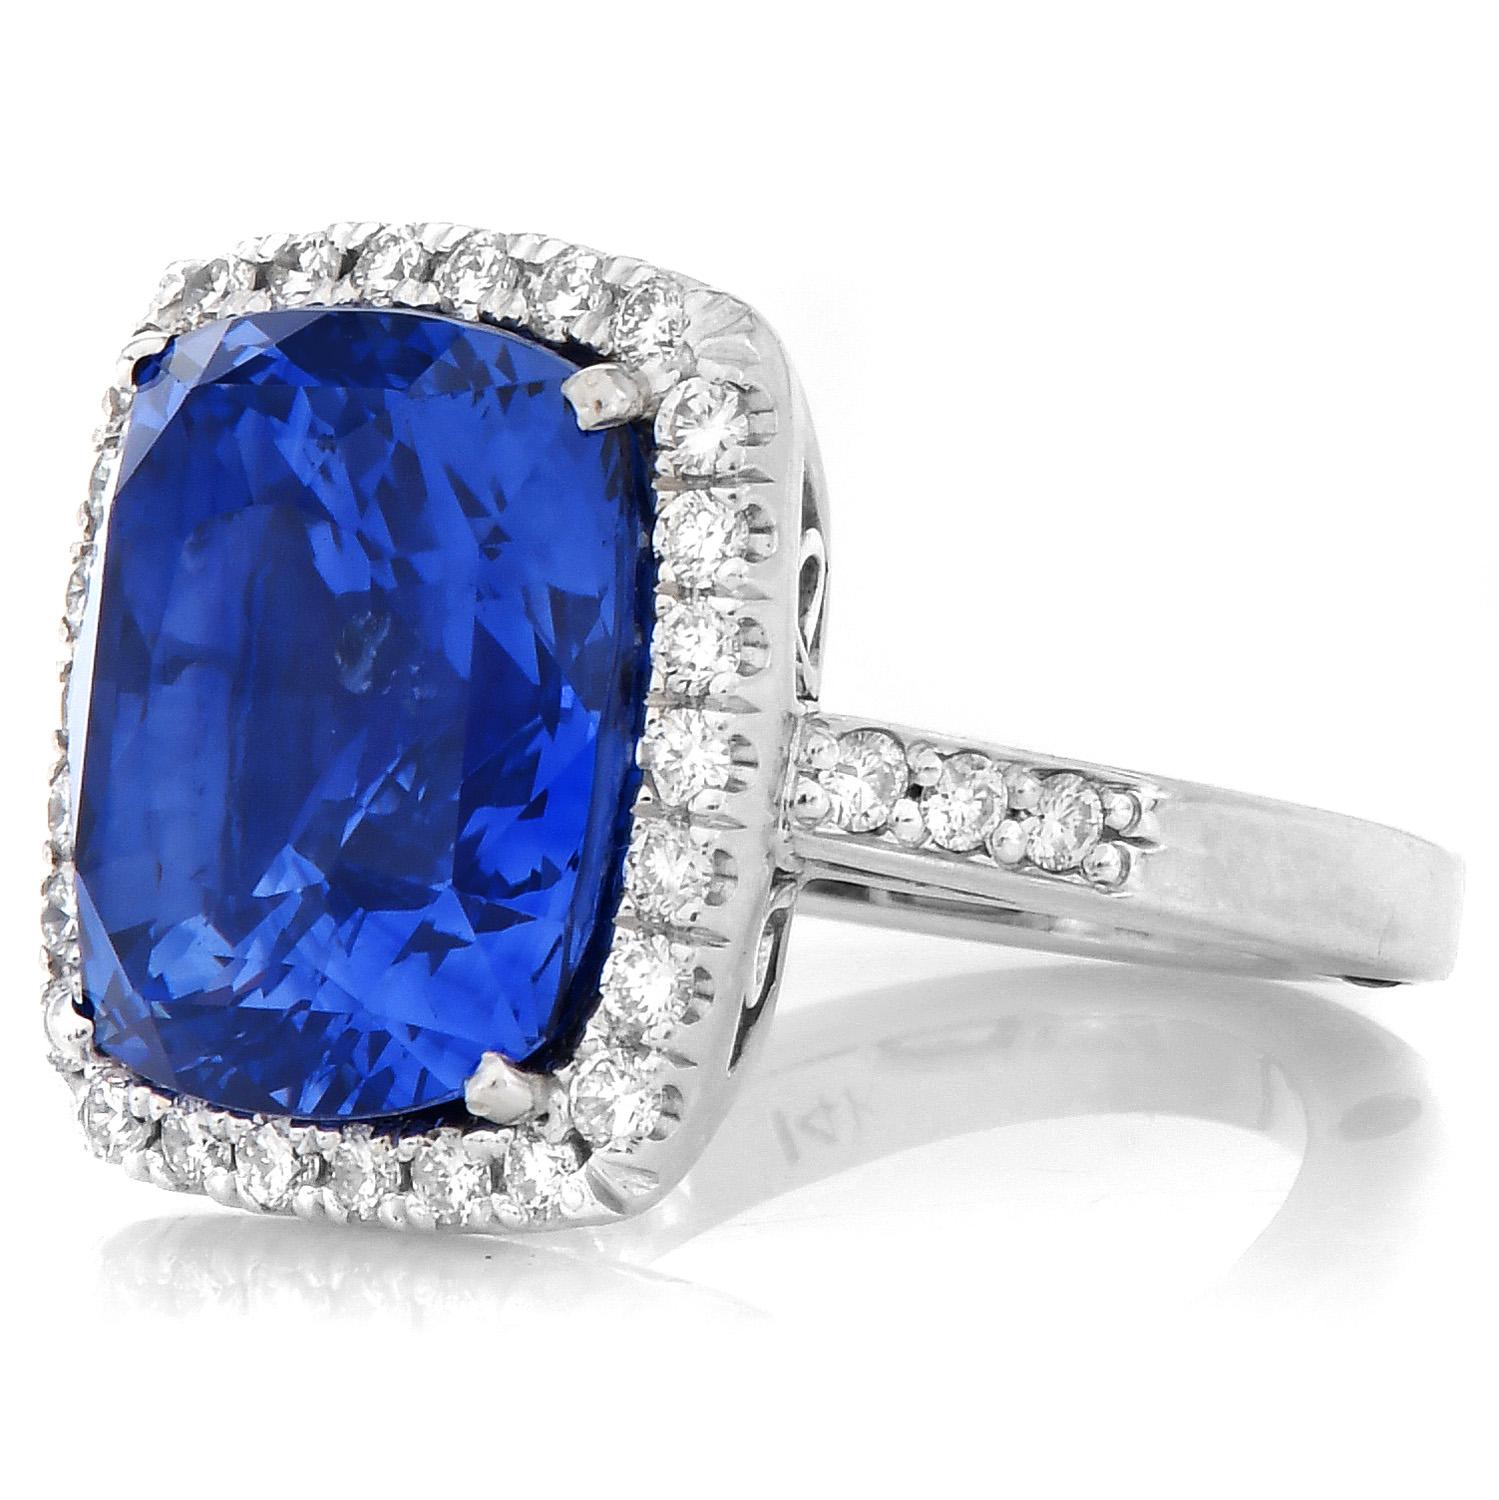 This exquisite hand-made cocktail Ring, presented a deep blue sapphire Adorned by a diamond halo, reassuring a luxurious and majestic look.

Crafted in solid 14K White Gold, Featuring in the center an exceptional Cushion Cut, AGL Certified Sri